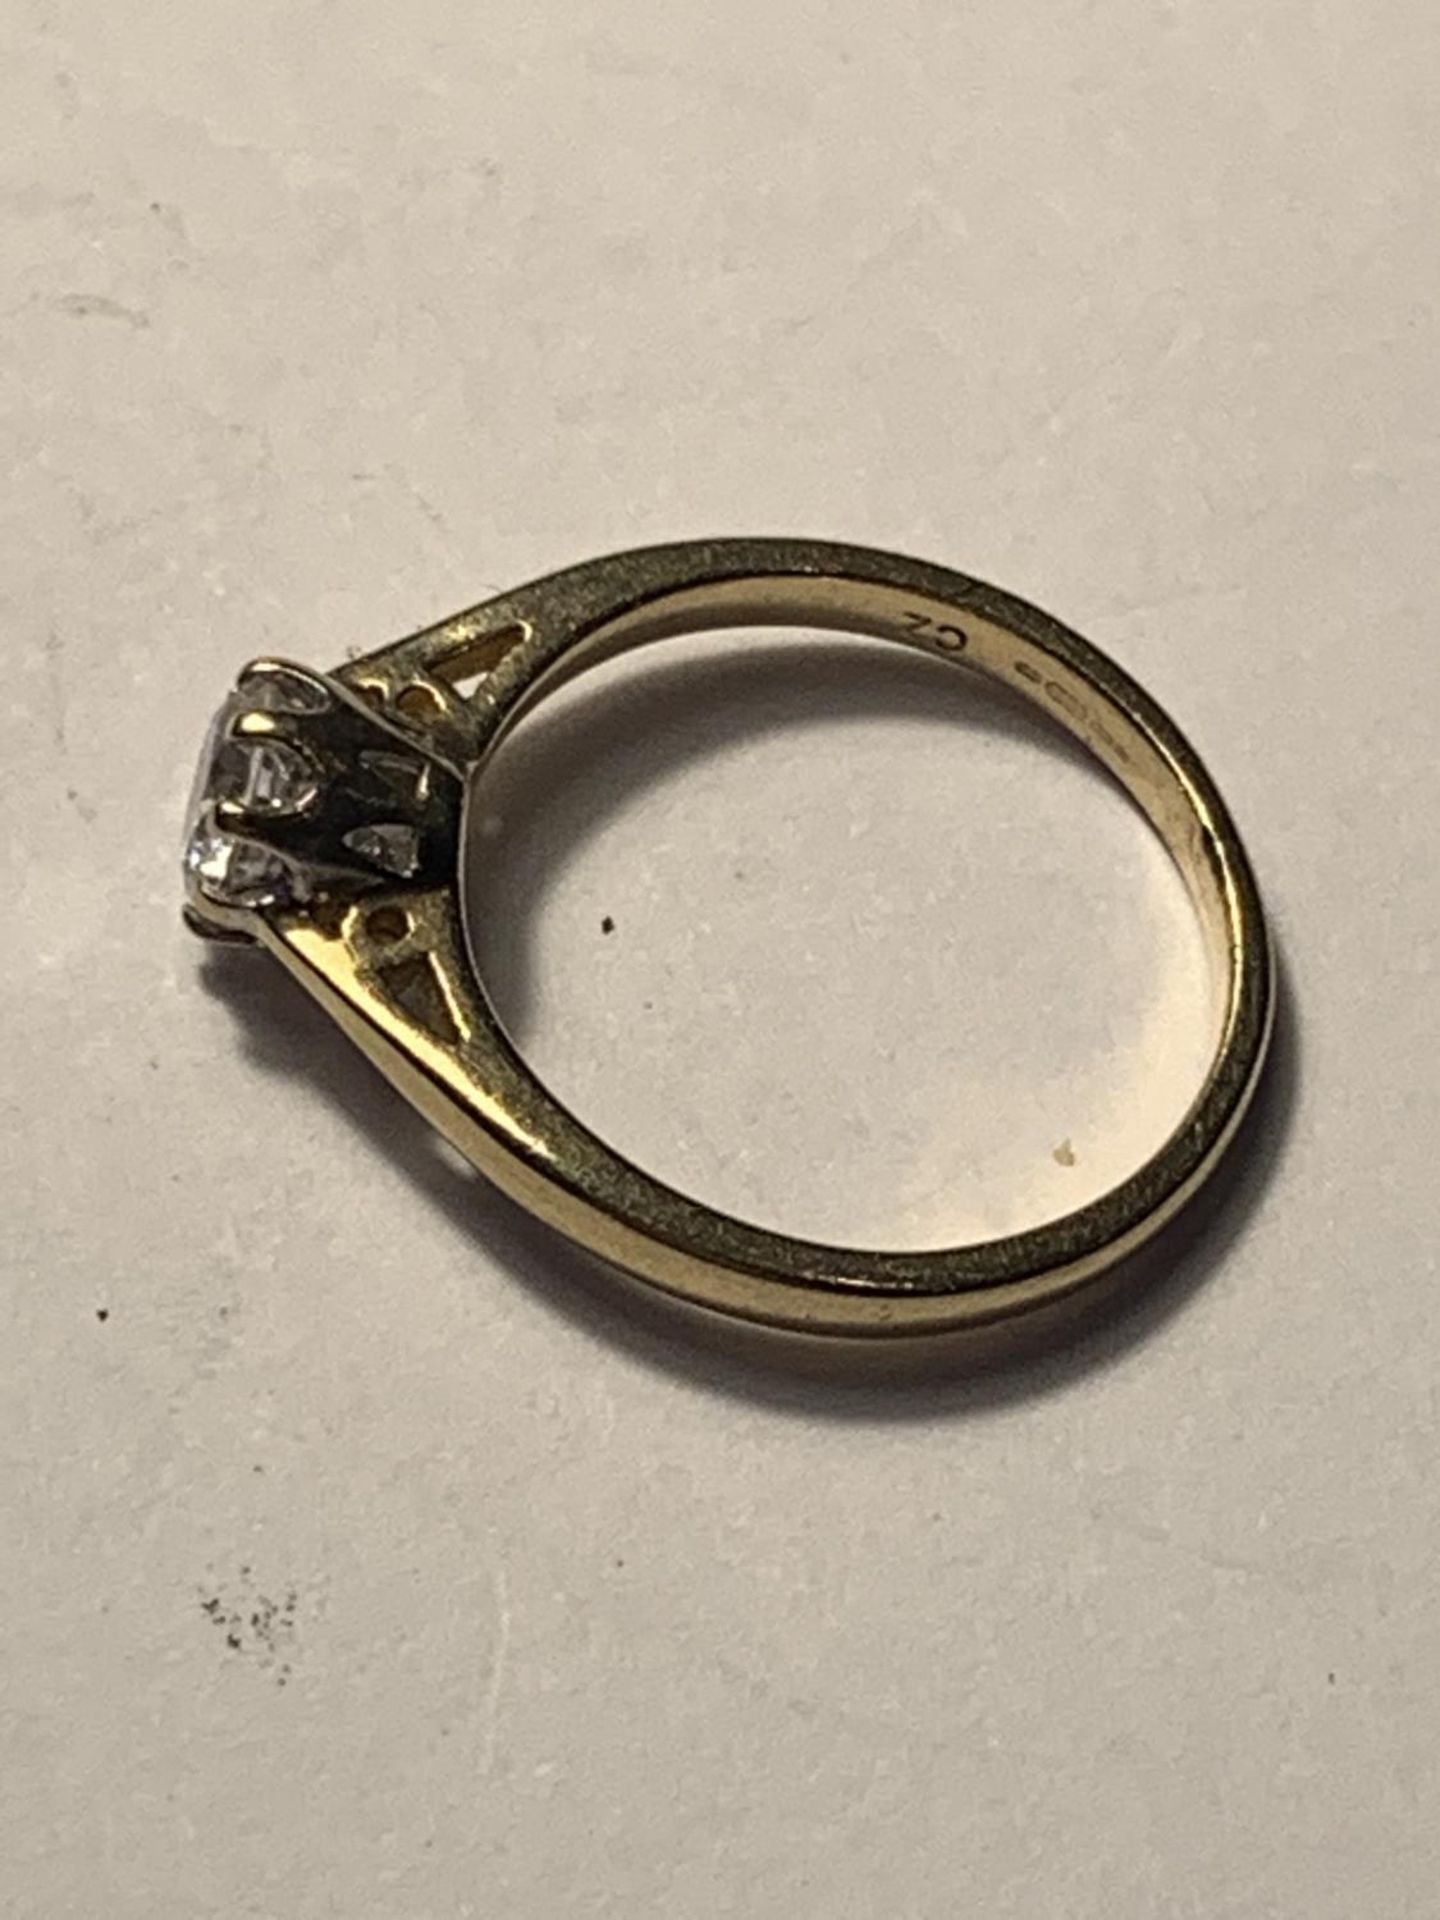 A 9 CARAT GOLD RING WITH A SOLITAIRE CUBIC ZIRCONIA SIZE J/K - Image 2 of 3